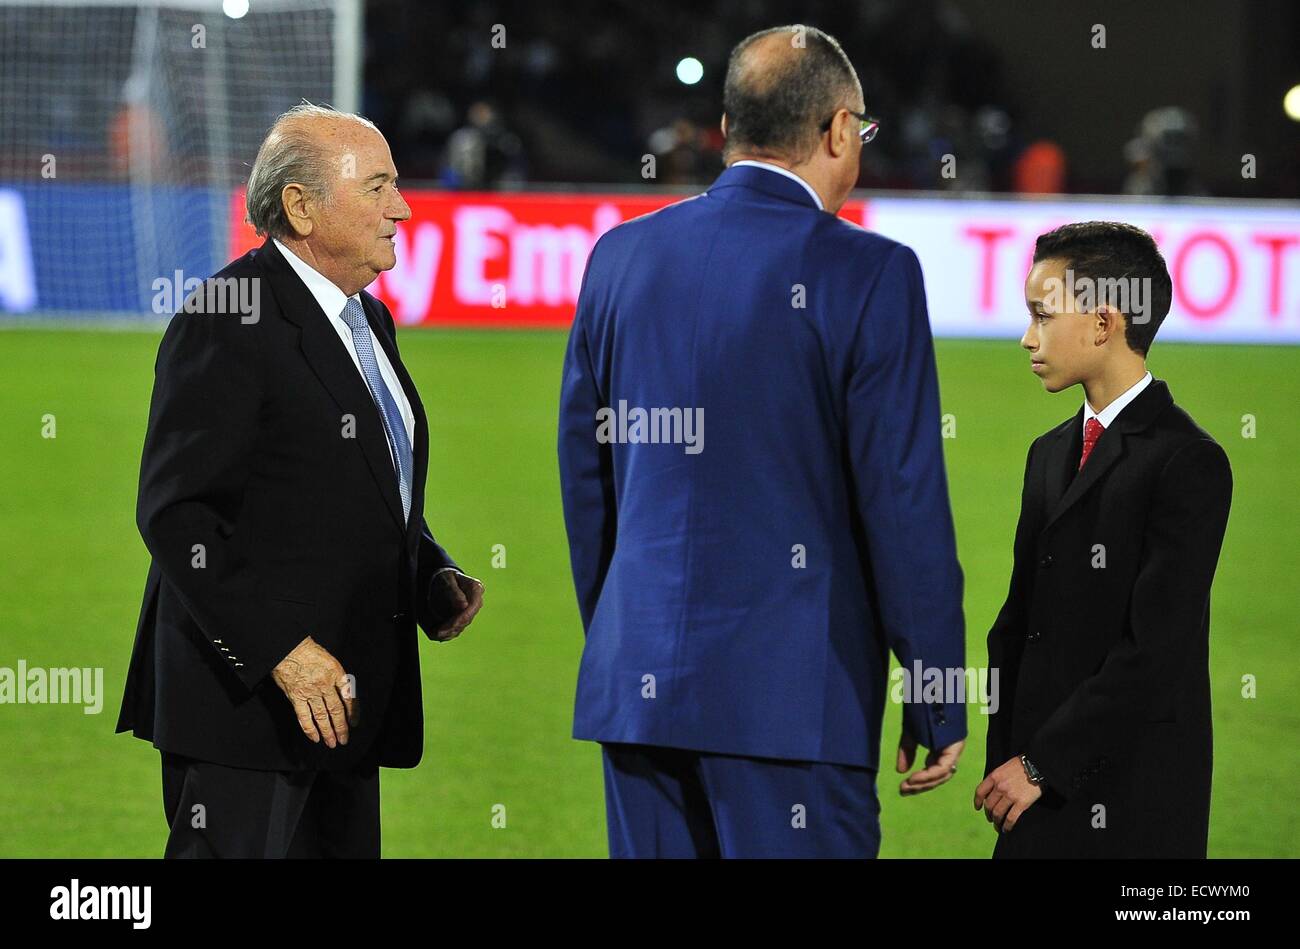 Marrakech, Morocco. 20th Dec, 2014. FIFA president JOSEPH BLATTER (L) and Morocco prince MOULAY HASSAN (R) during the FIFA Club World Cup 2014 in Marrakech. Credit:  Marcio Machado/ZUMA Wire/Alamy Live News Stock Photo